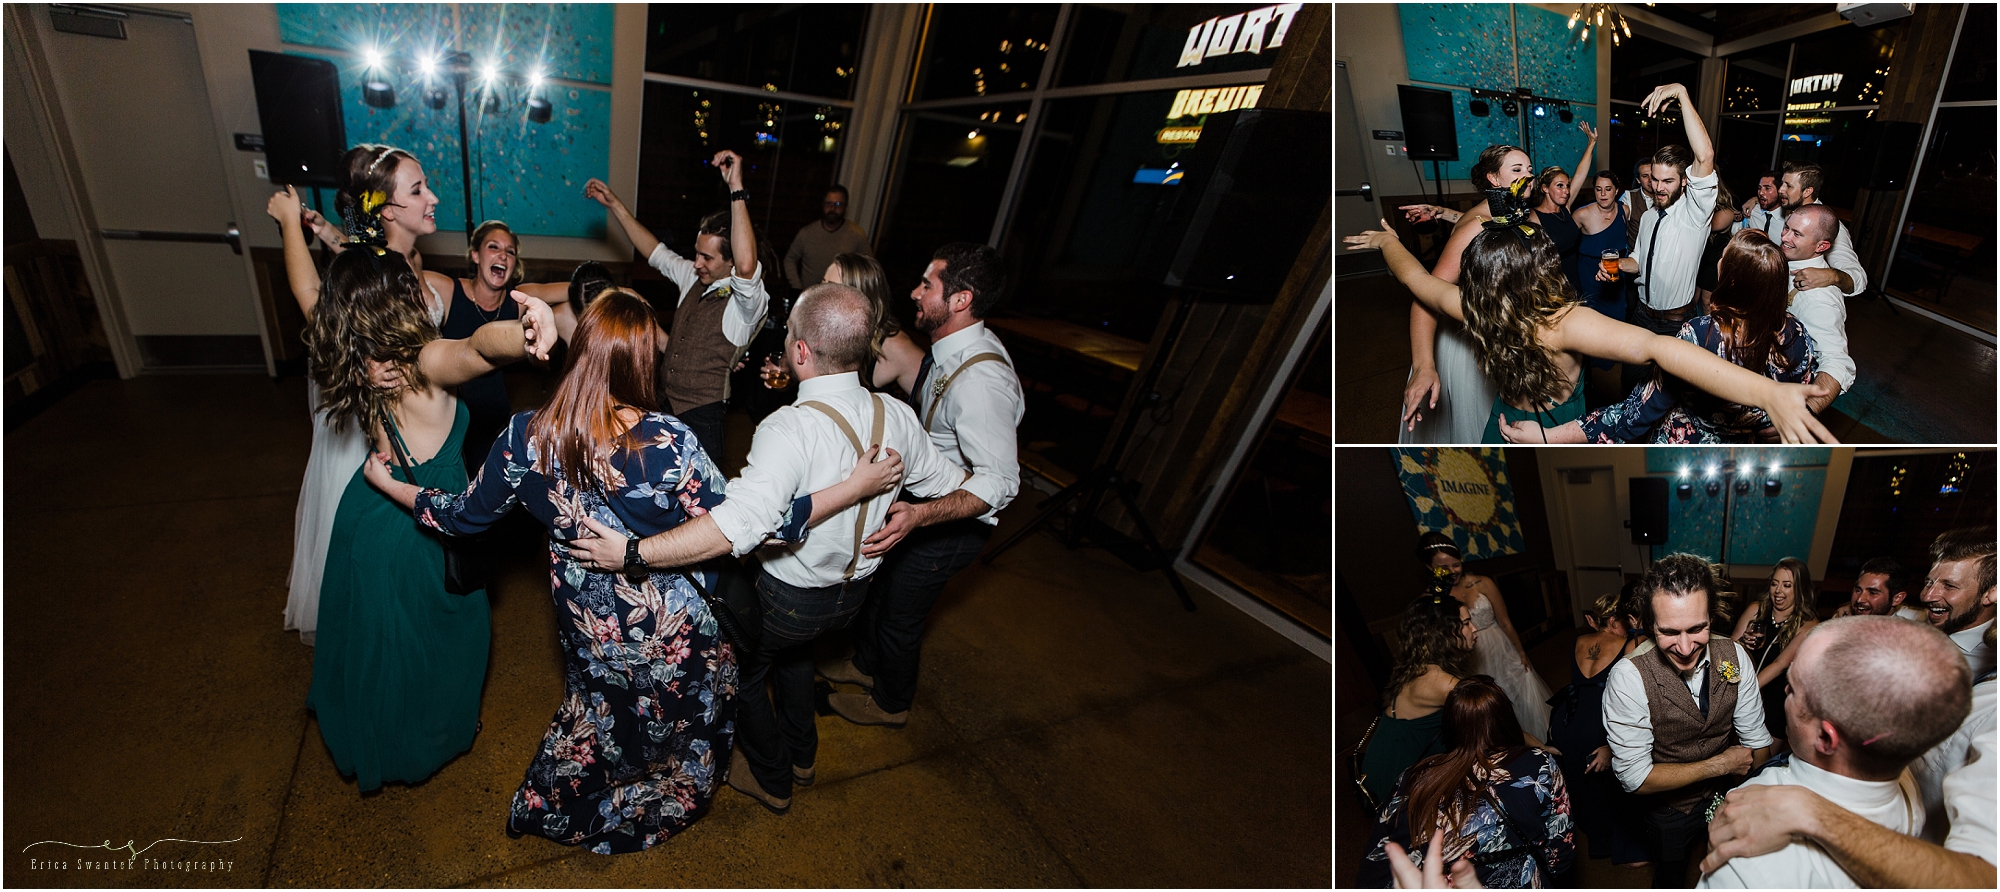 The dance floor at the Hop Mahal lights up at this Worthy Brewing Wedding in Bend Oregon. | Erica Swantek Photography